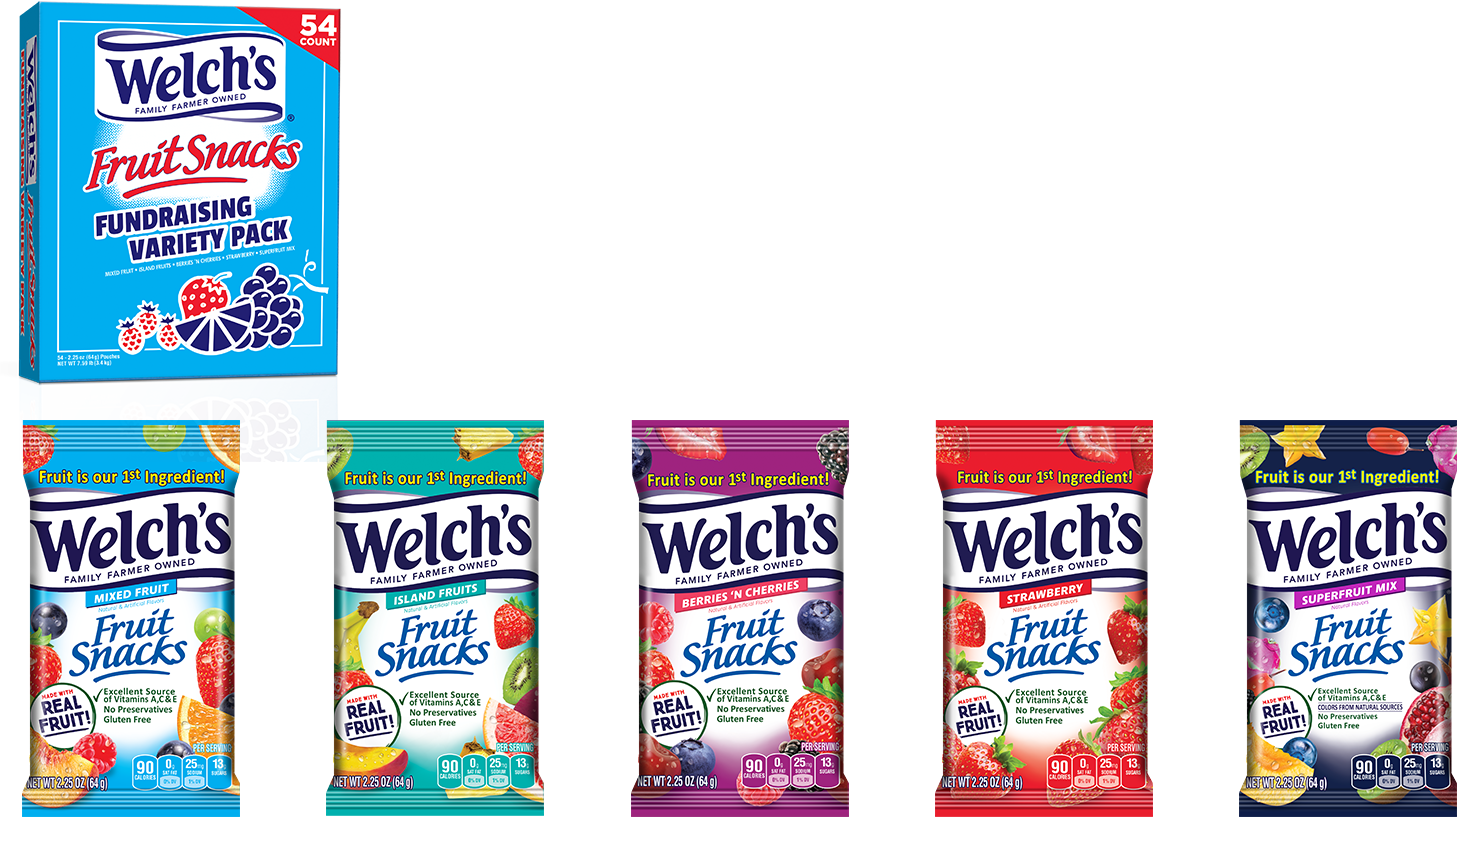 welch's packs